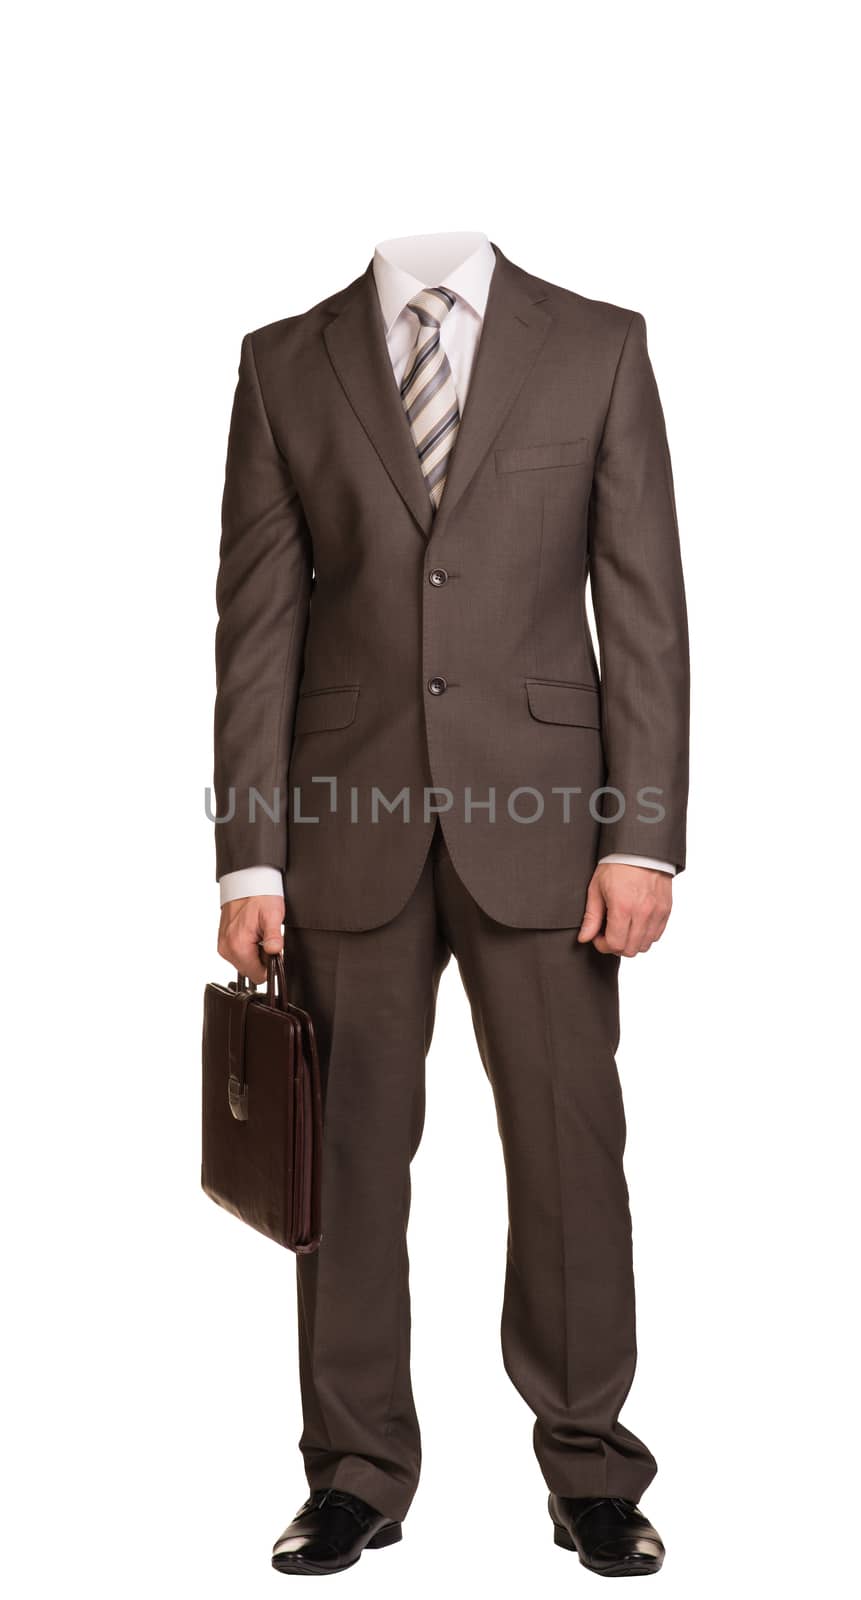 Businessman in suit without head, standing and holding suitcase. Isolated on white background